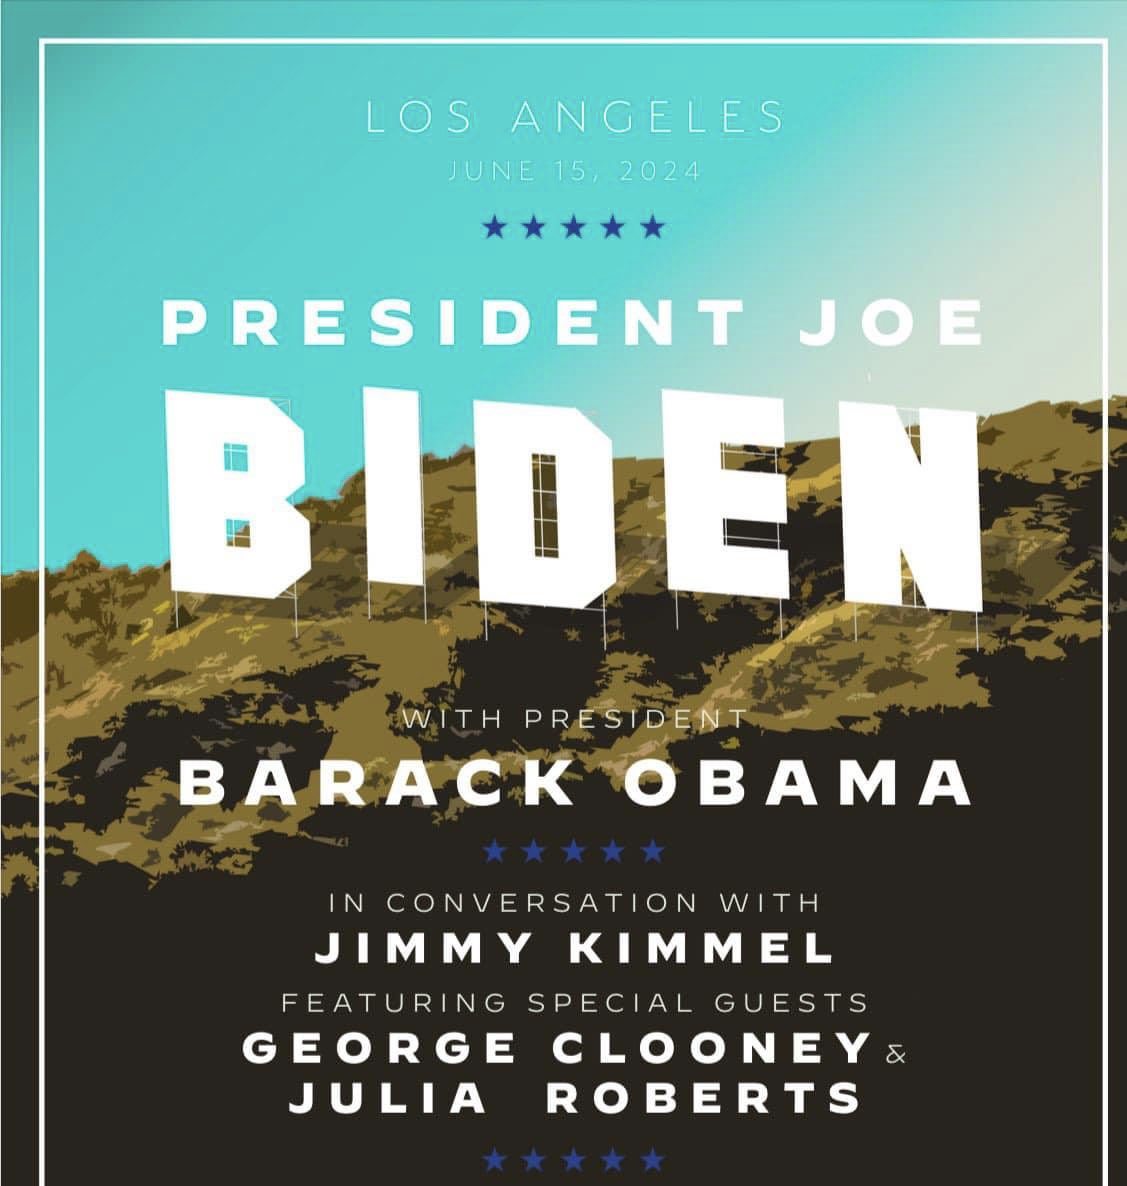 Friends, please join me at this amazing event with President Biden, President Obama, Jimmy Kimmel, Julia Roberts and George Clooney in Los Angeles Please include my name at checkout so the campaign knows you’re my guest Hope to see you in LA on 6/15! ♥️ twopresidents.eventbrite.com/?aff=113172155